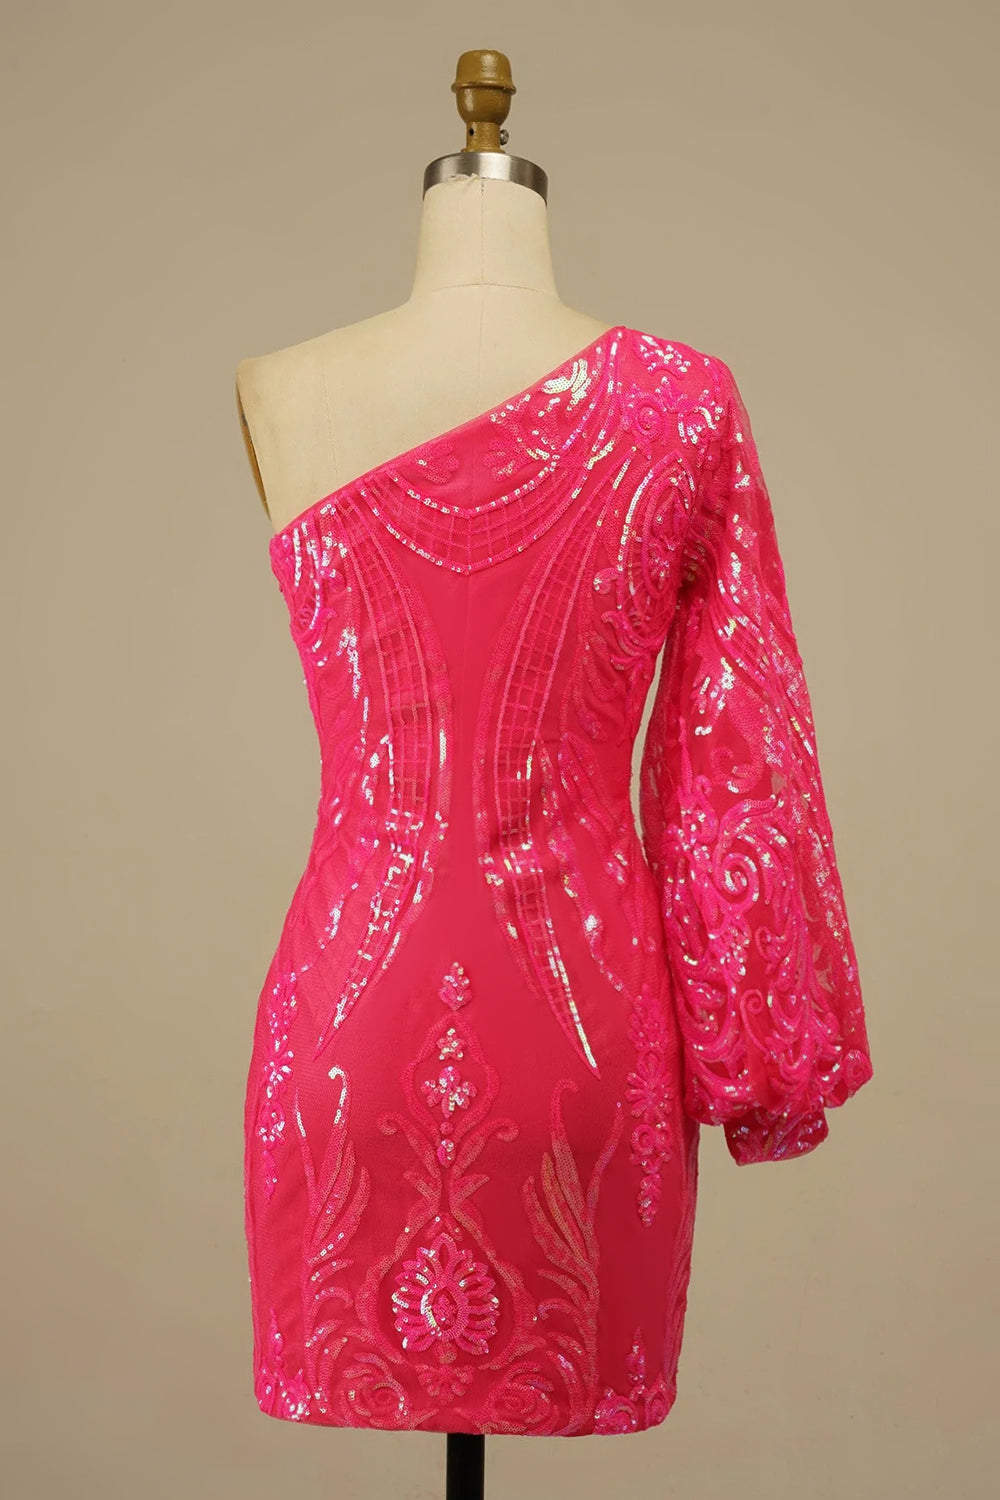 Hot Pink Beaded Sequins One Shoulder Tight Homecoming Dress